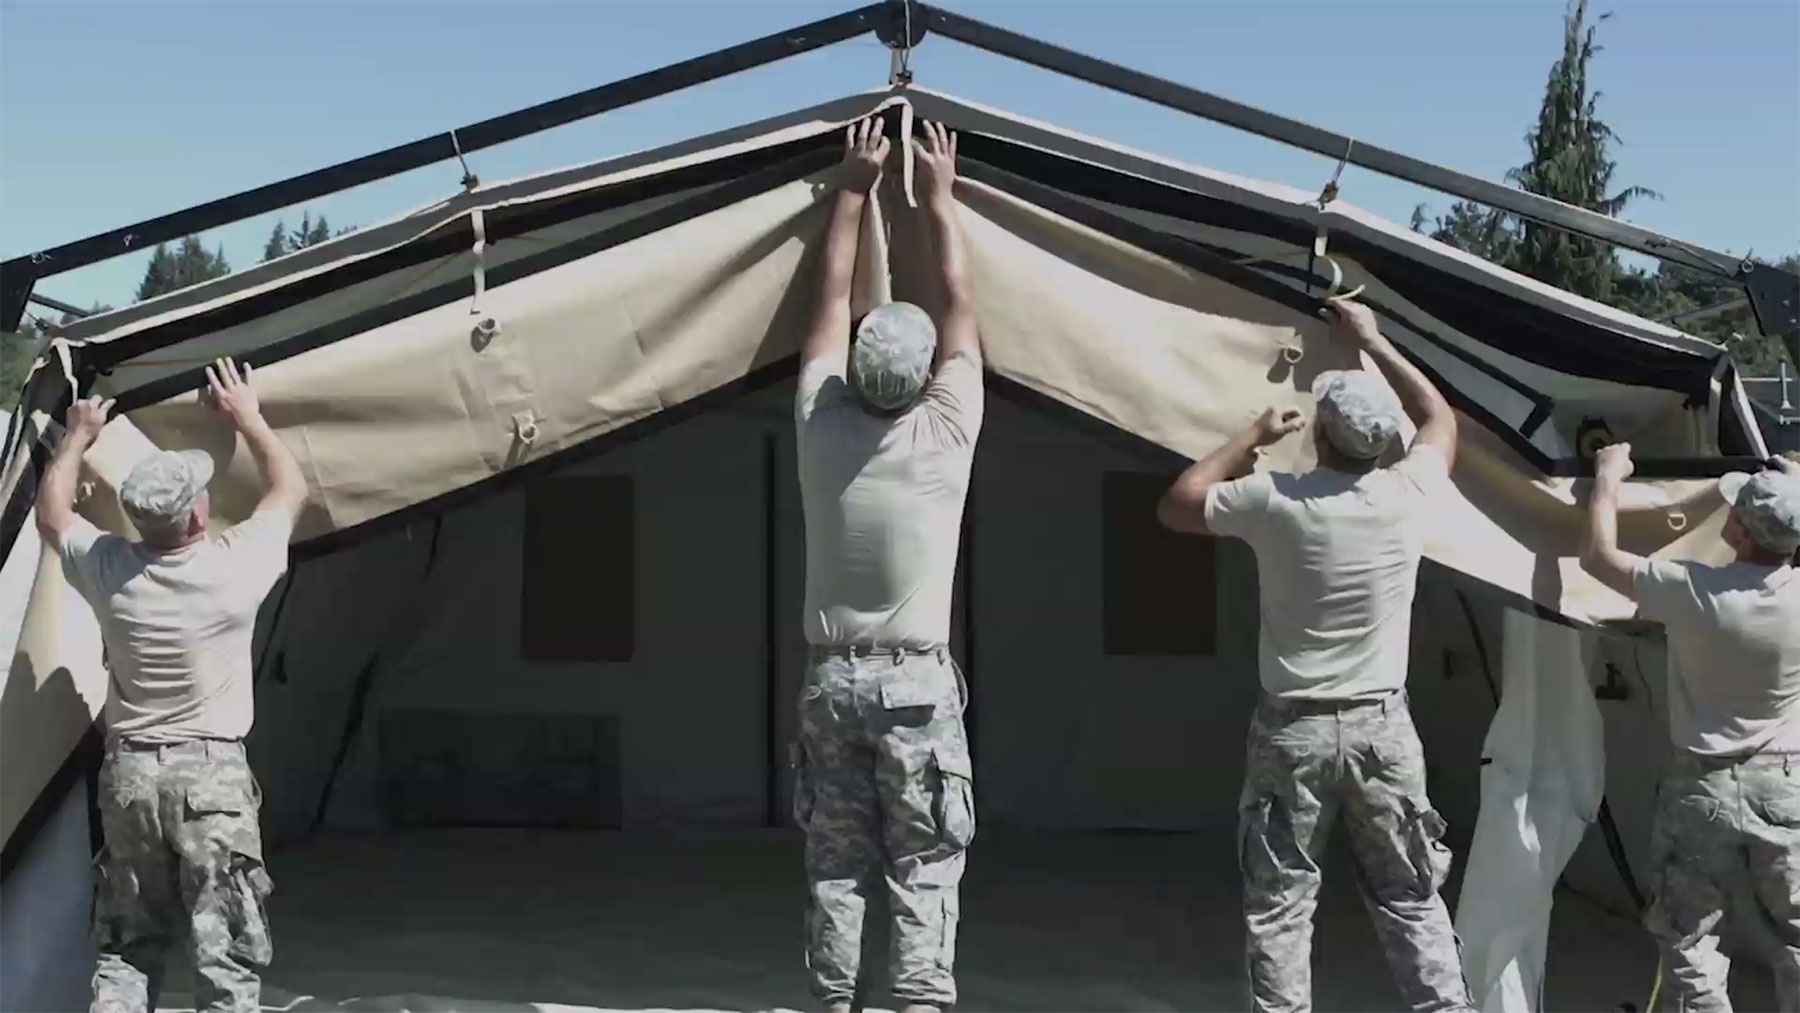 CAMSS: Applying Cover to CAMSS TAC Rapid Deployment Military Shelter